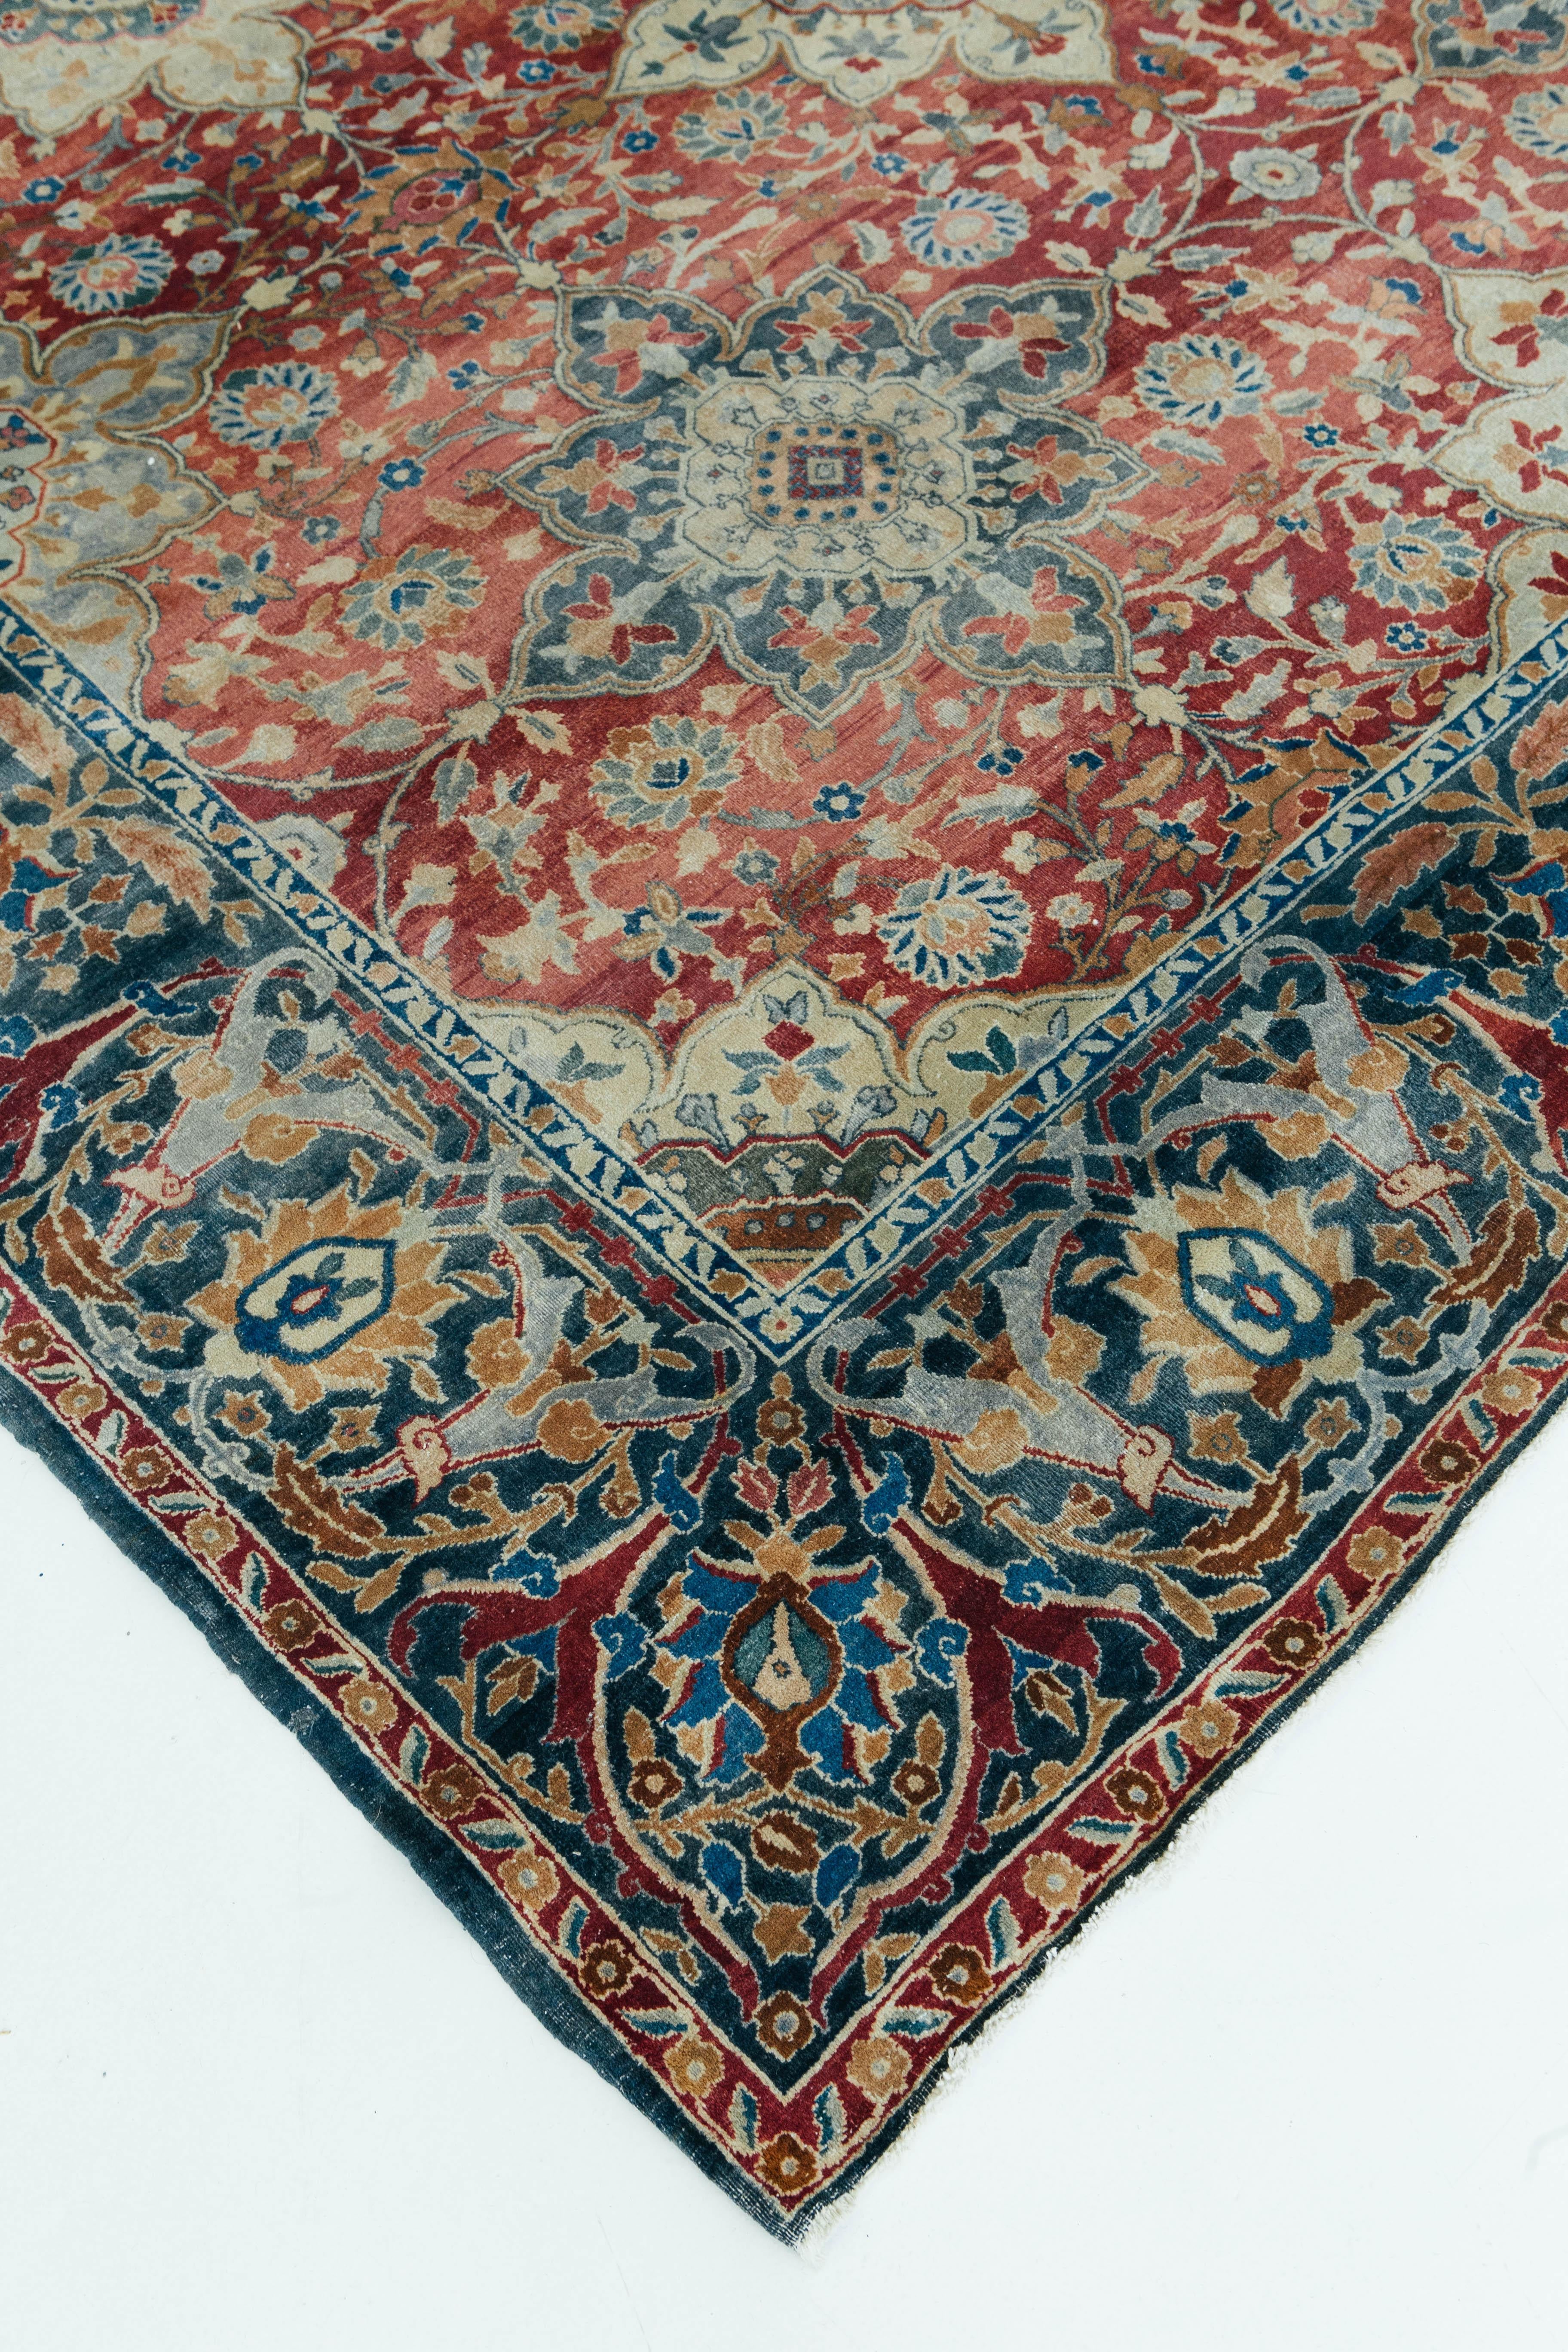 A antique Indian Agra rug from the Uttar Pradesh region of Northern India. This beautiful oversized rug is a well preserved antique piece with beautiful red, blue, and ivory hues. Together these colors create beautifully detailed floral patterns